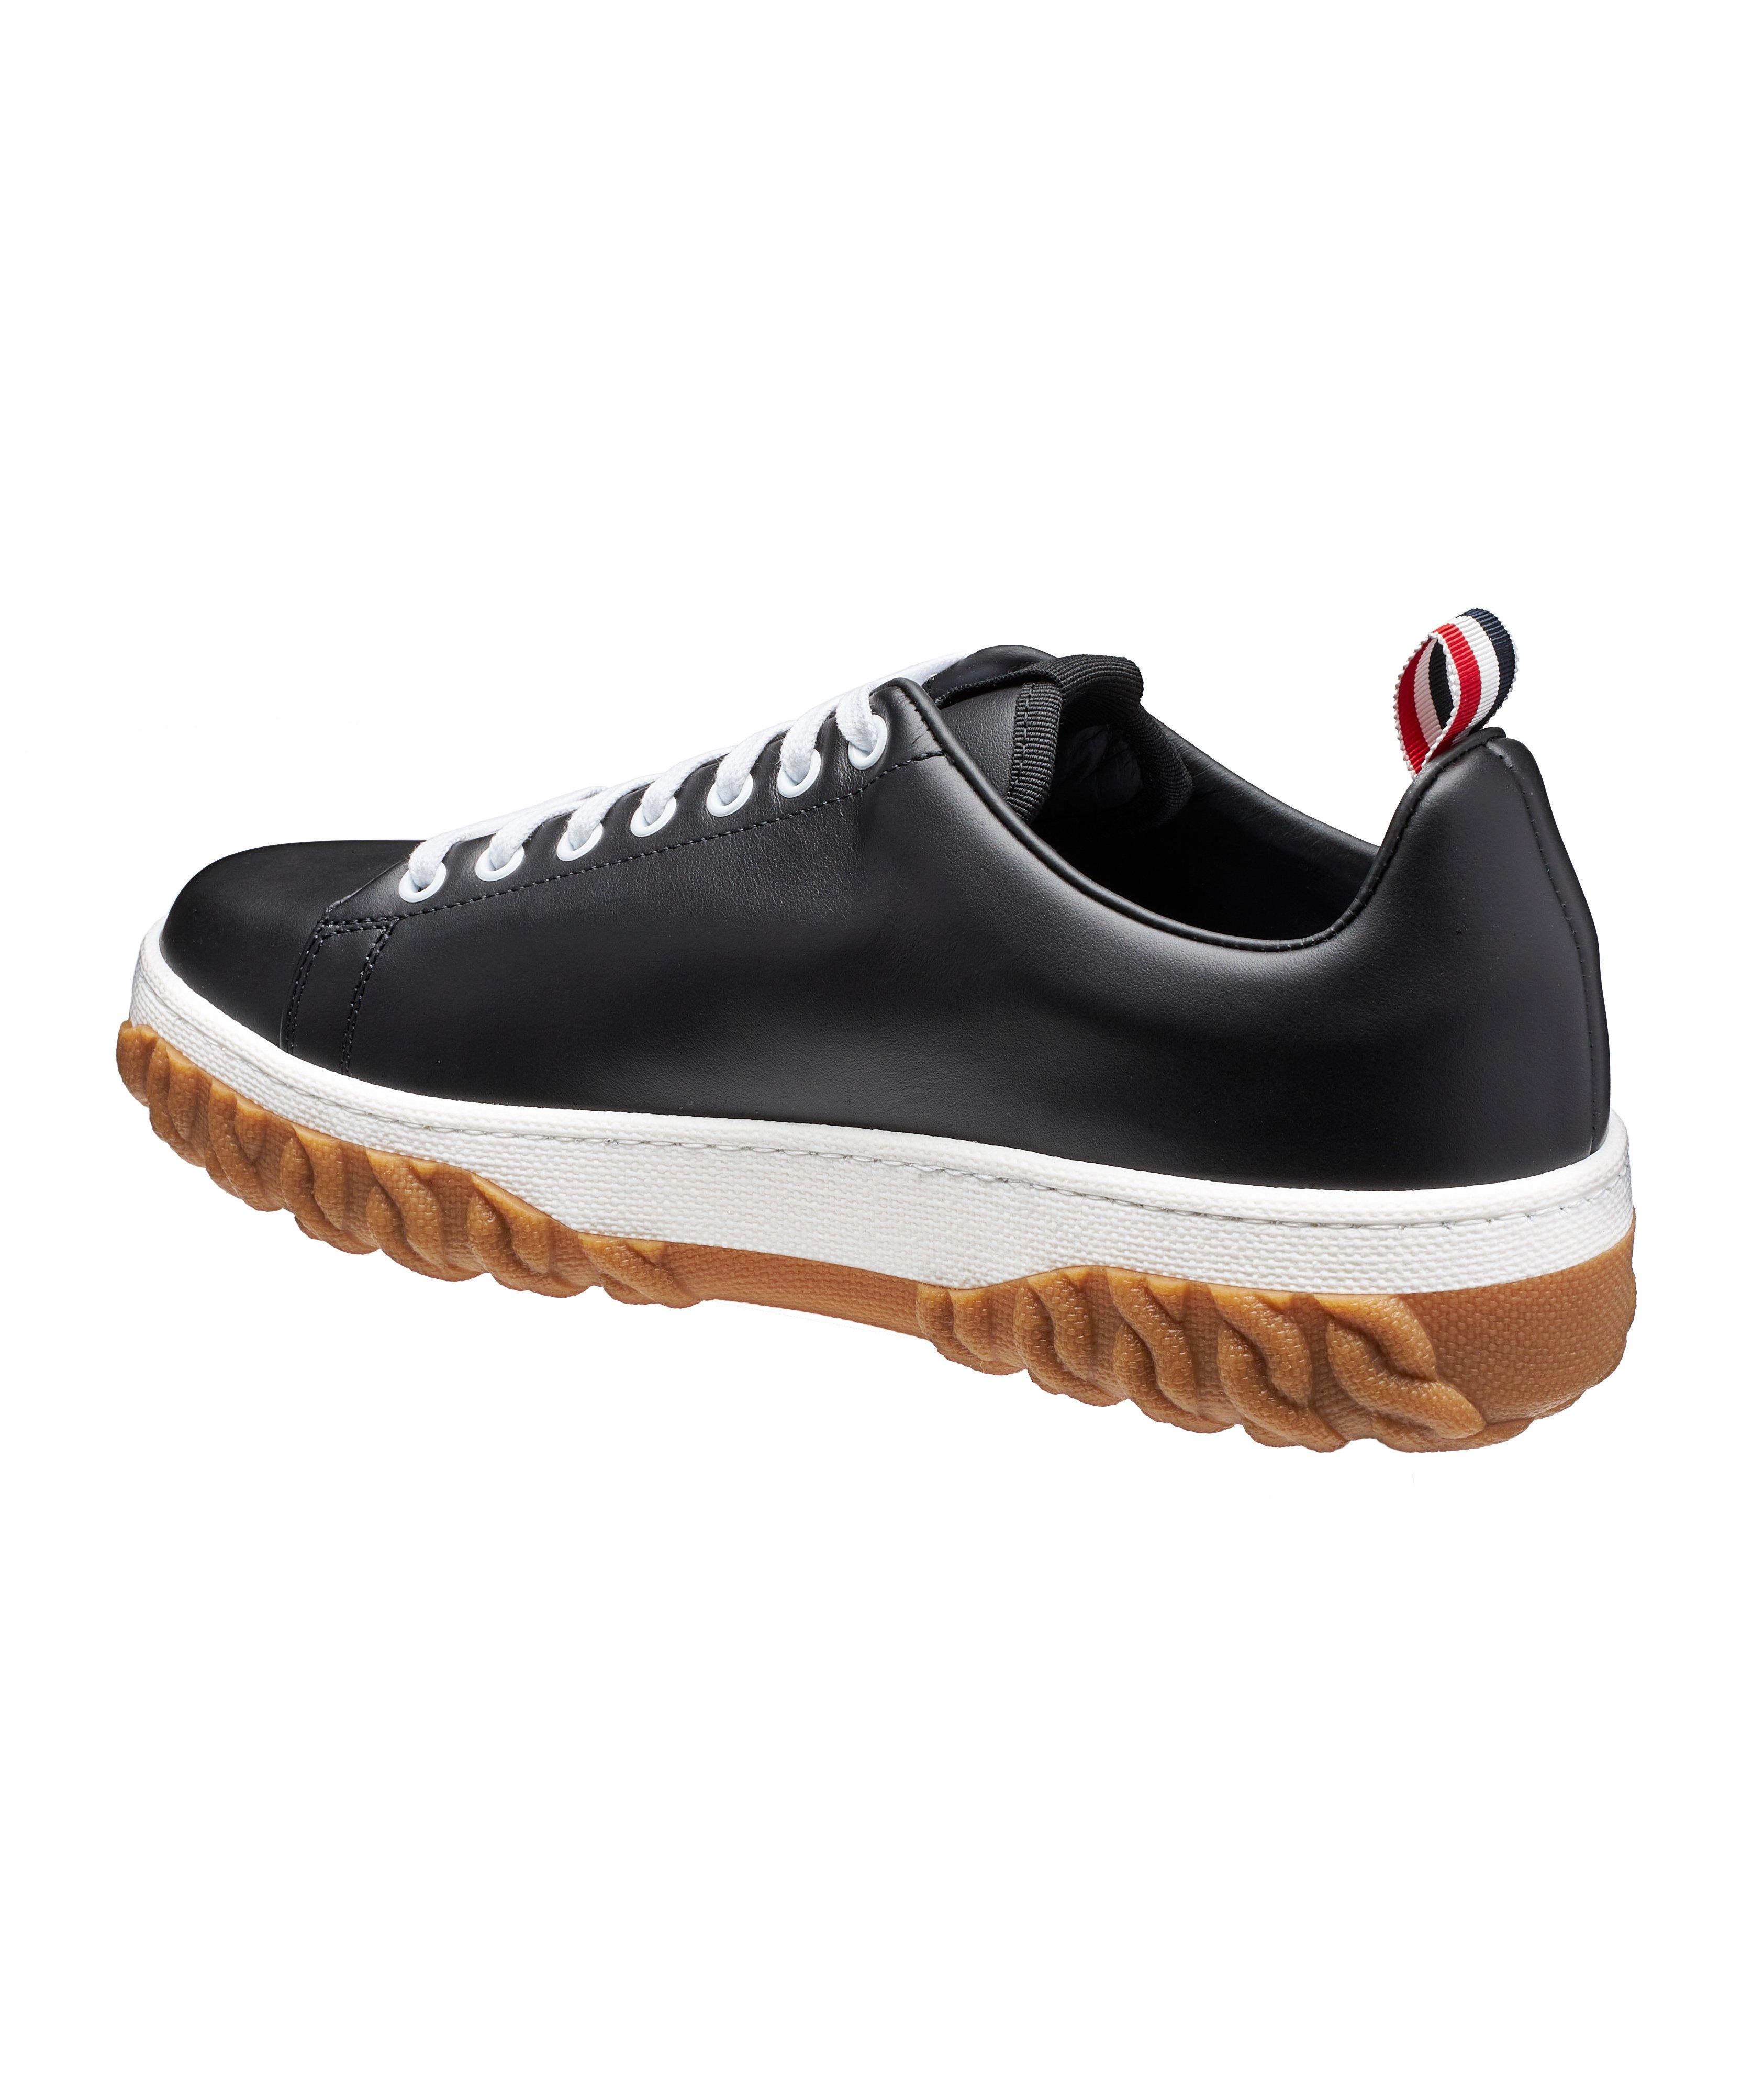 Cable Knit Sole Court Sneaker image 1